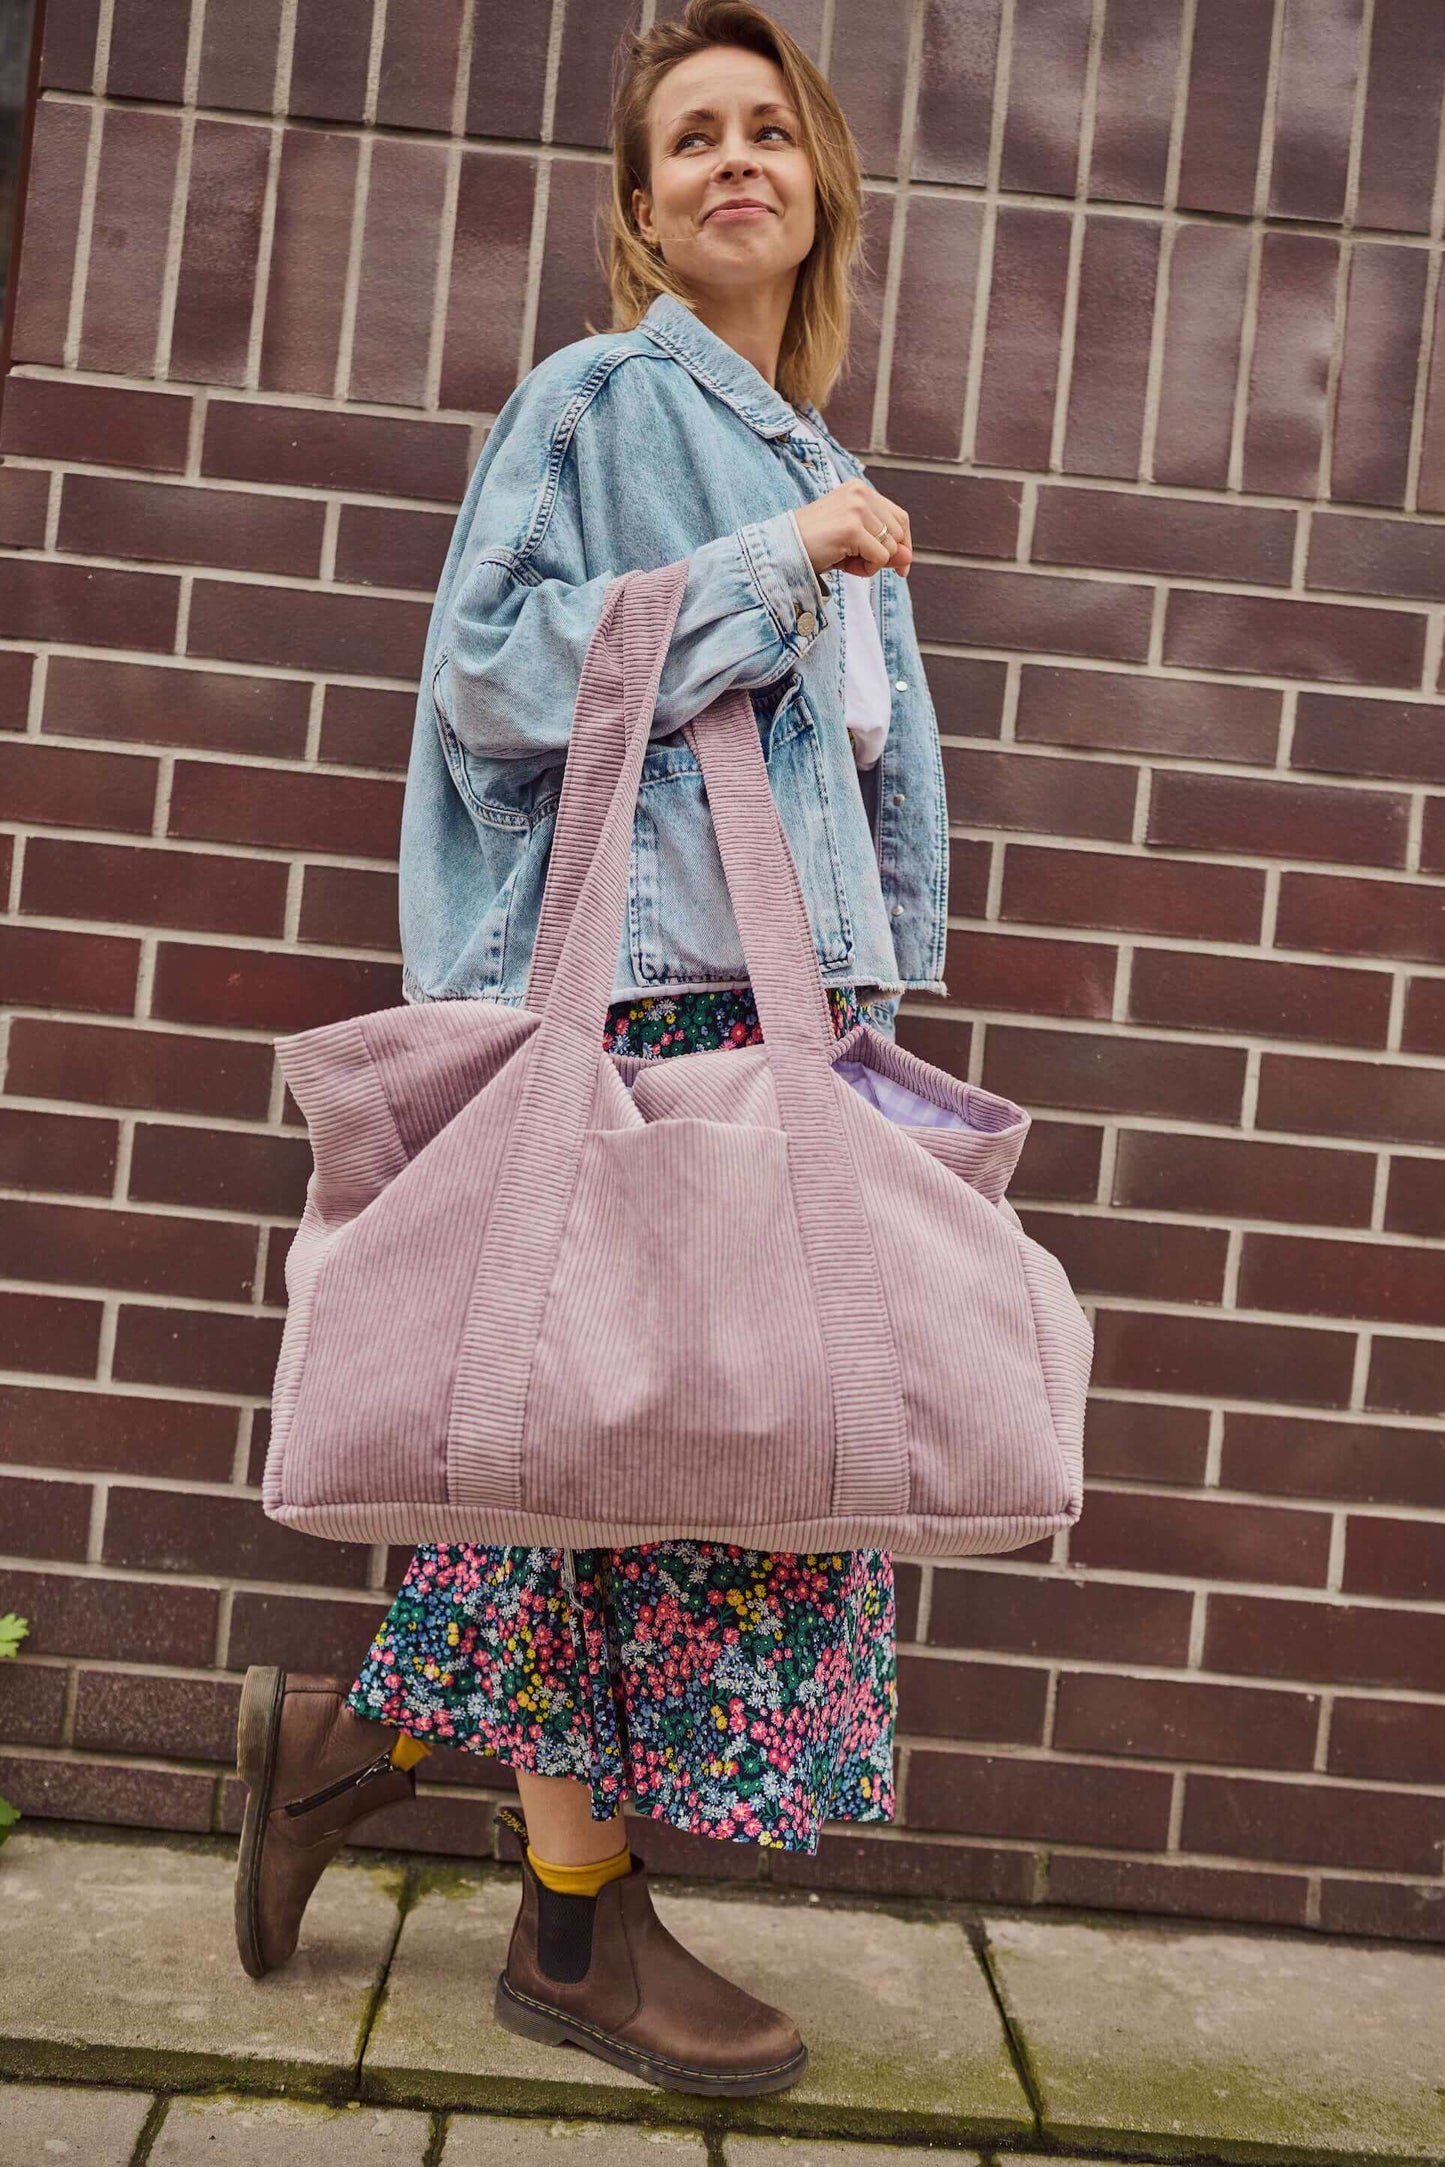 Corduroy Mom Bag in Lavender by Bettys Home.Young mom with her lavender tote bag and shopper bag